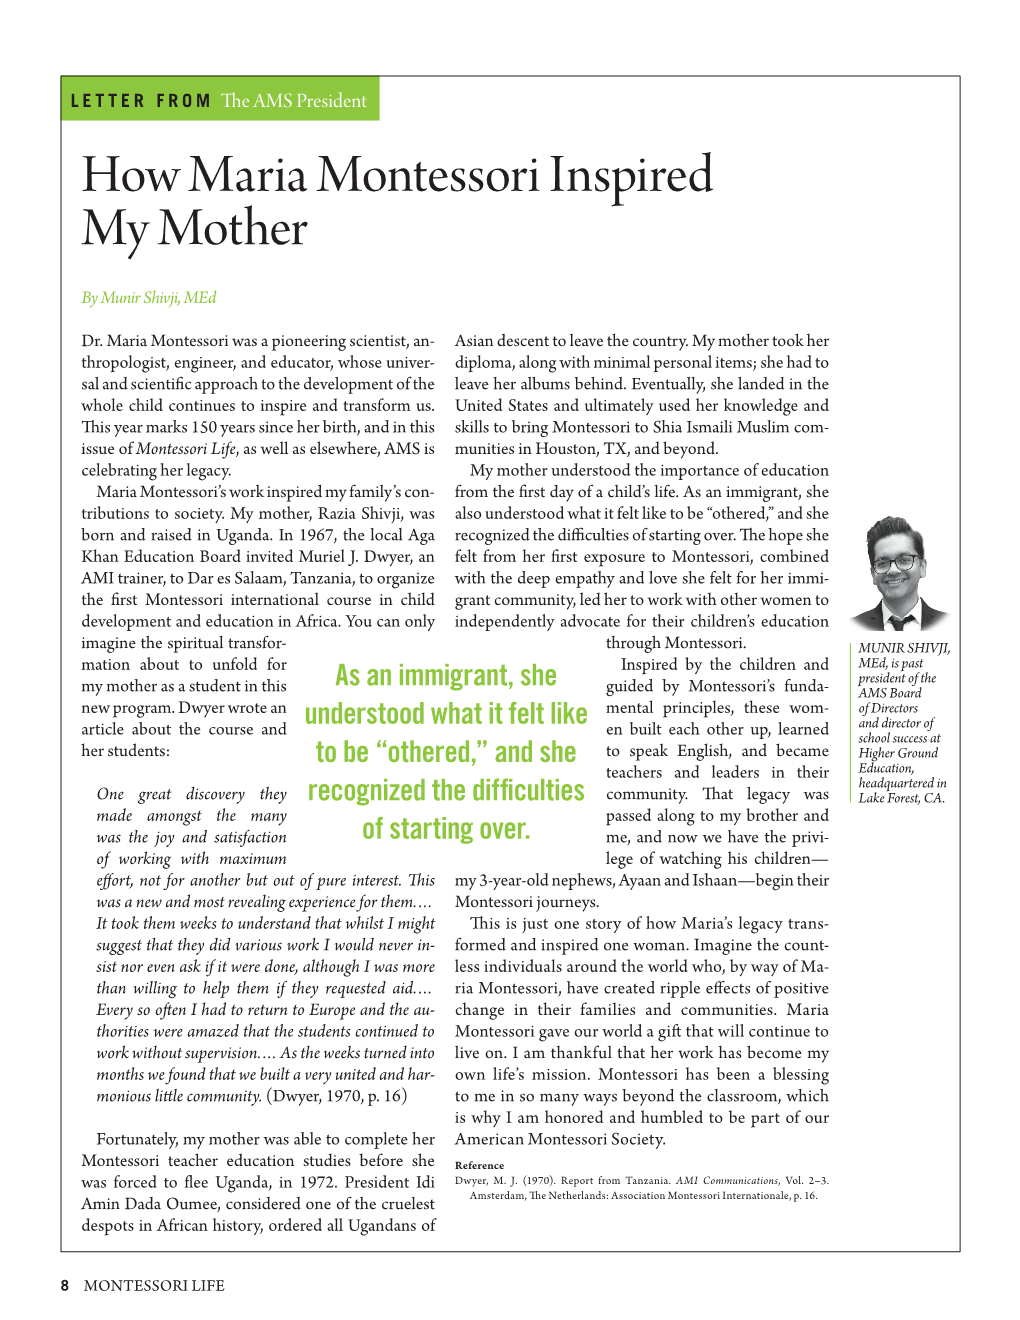 How Maria Montessori Inspired My Mother